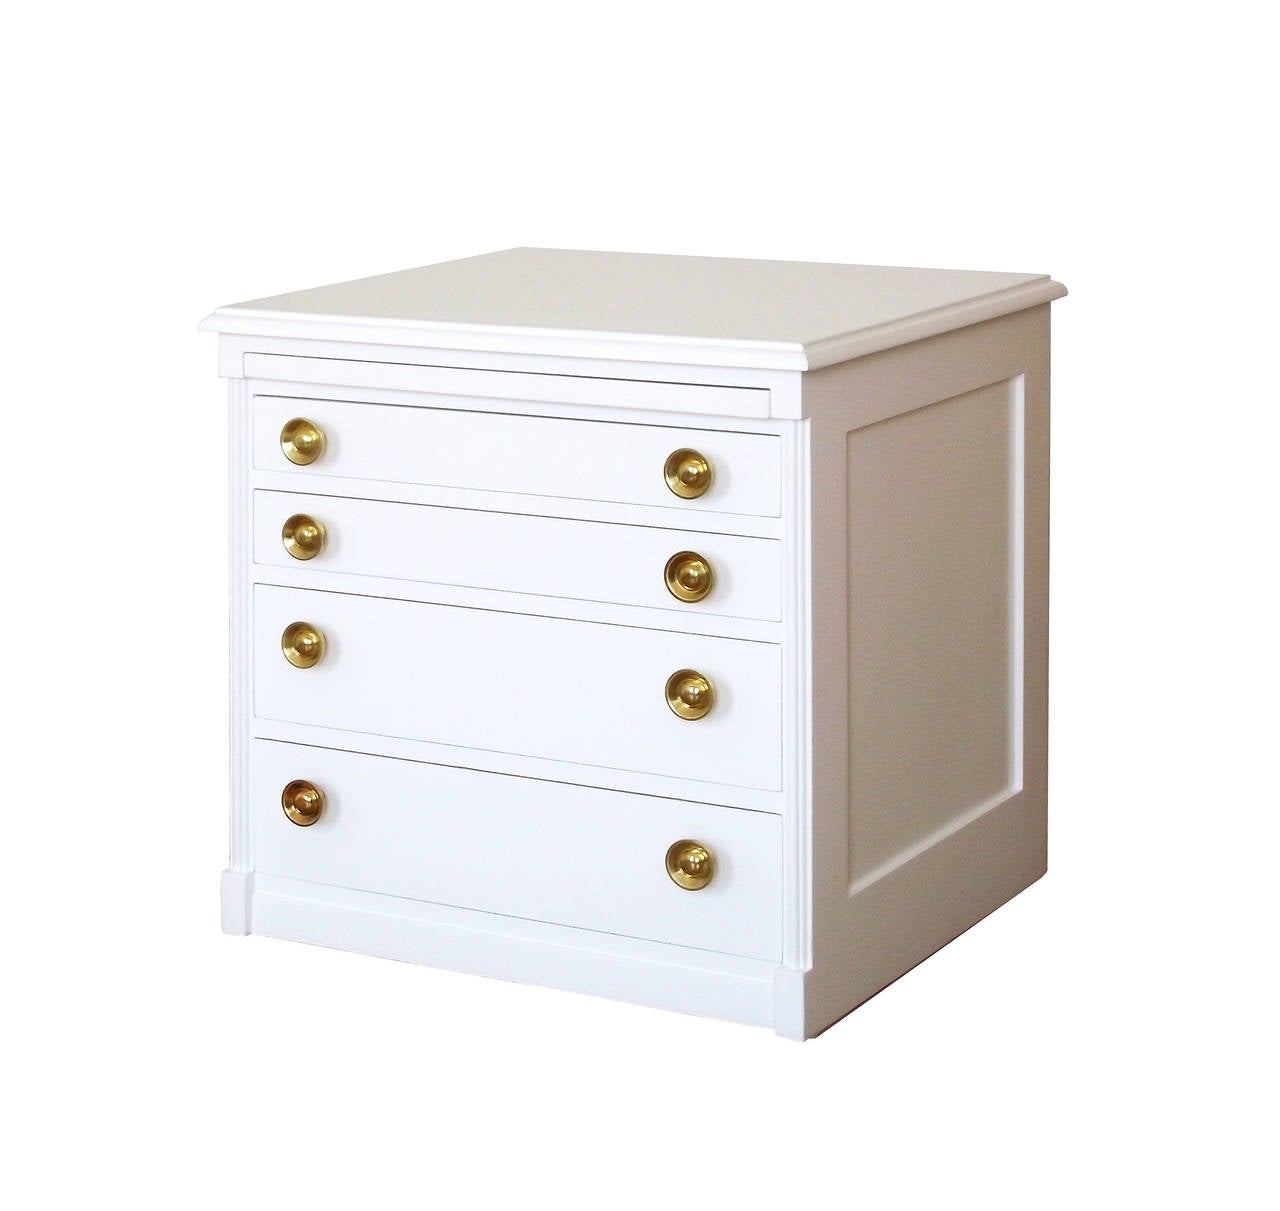 A very chic and highly functional pair of solid wood, small chest s of drawers in a white, semi-gloss lacquer, each with four drawers (two shallow and two deeper), a pull-out shelf at top, solid brass pulls and concealed casters. Clean, classic